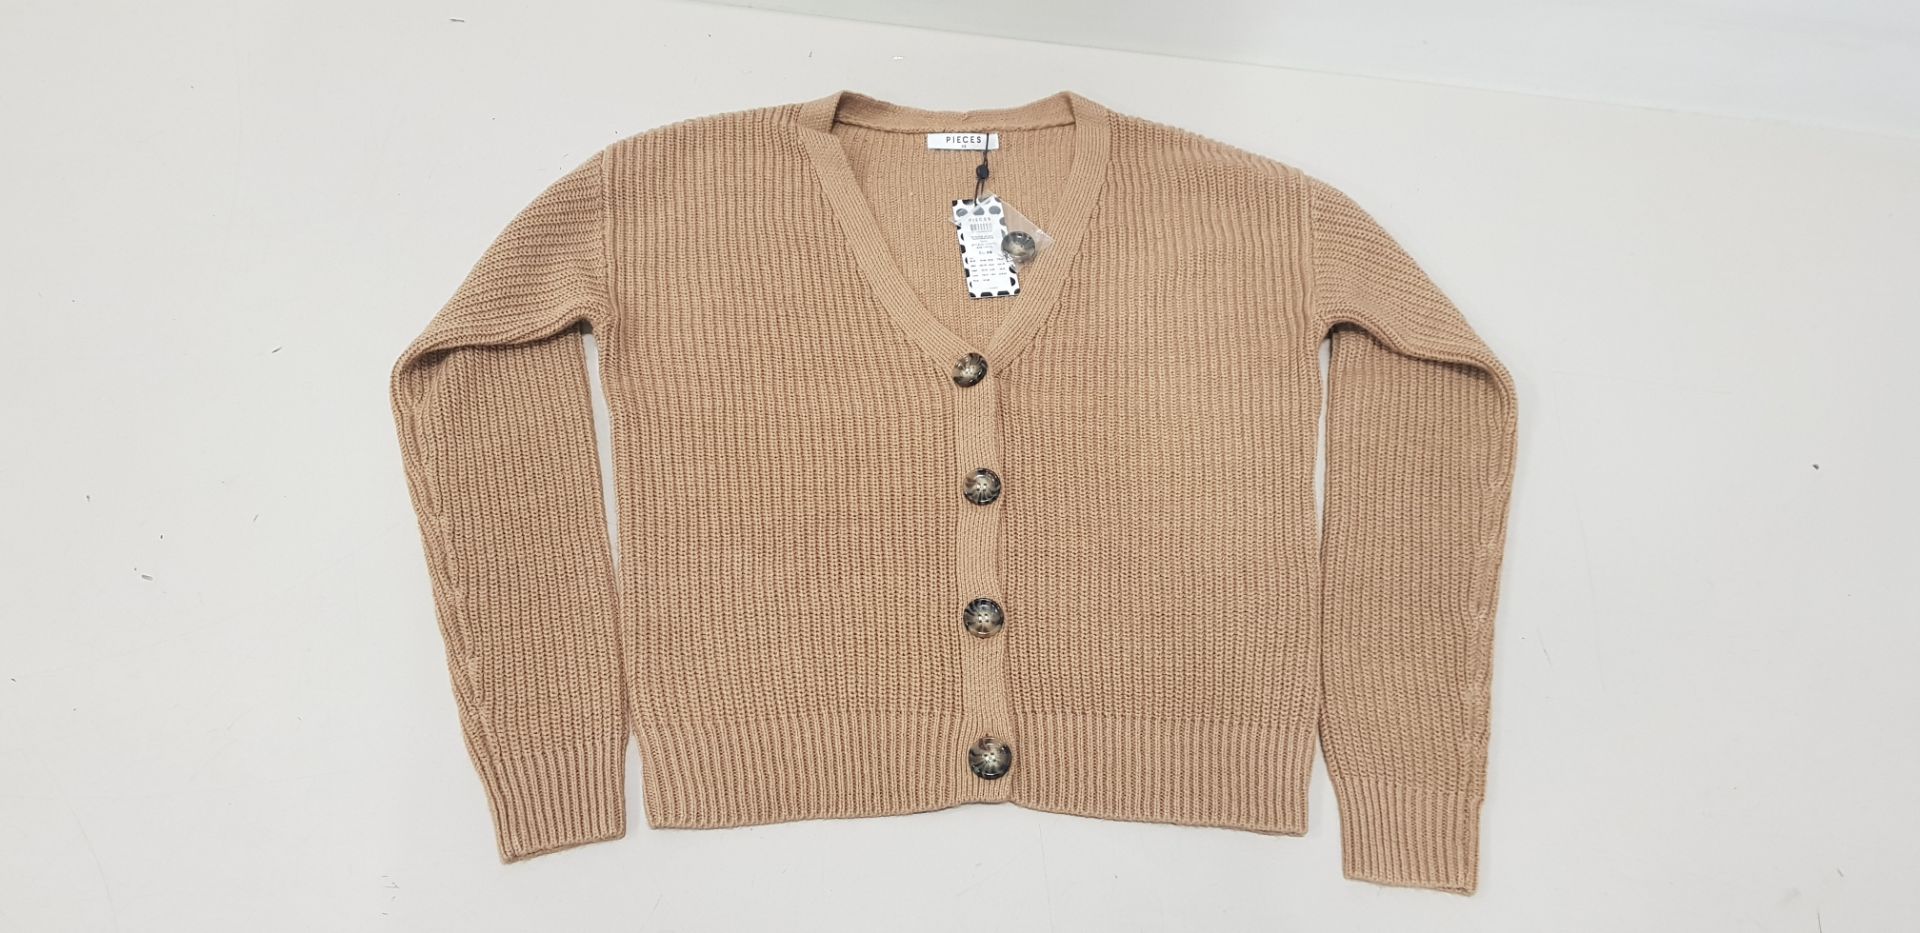 32 X BRAND NEW PIECES KNIT CARDIGAN NOOS (SIZE XS) - RRP £32.00PP